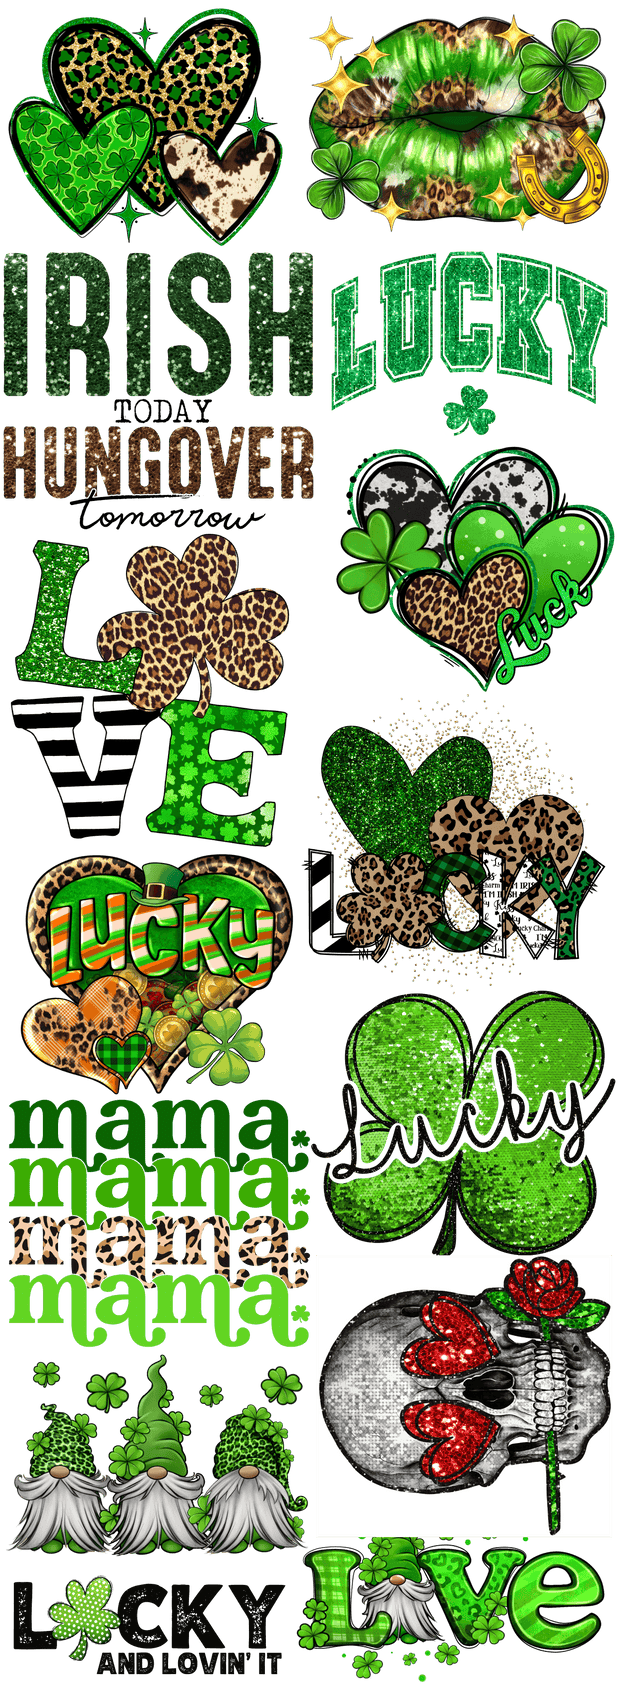 St. Patrick's Day 1 60x22" Gang Sheet - Twisted Image Transfers